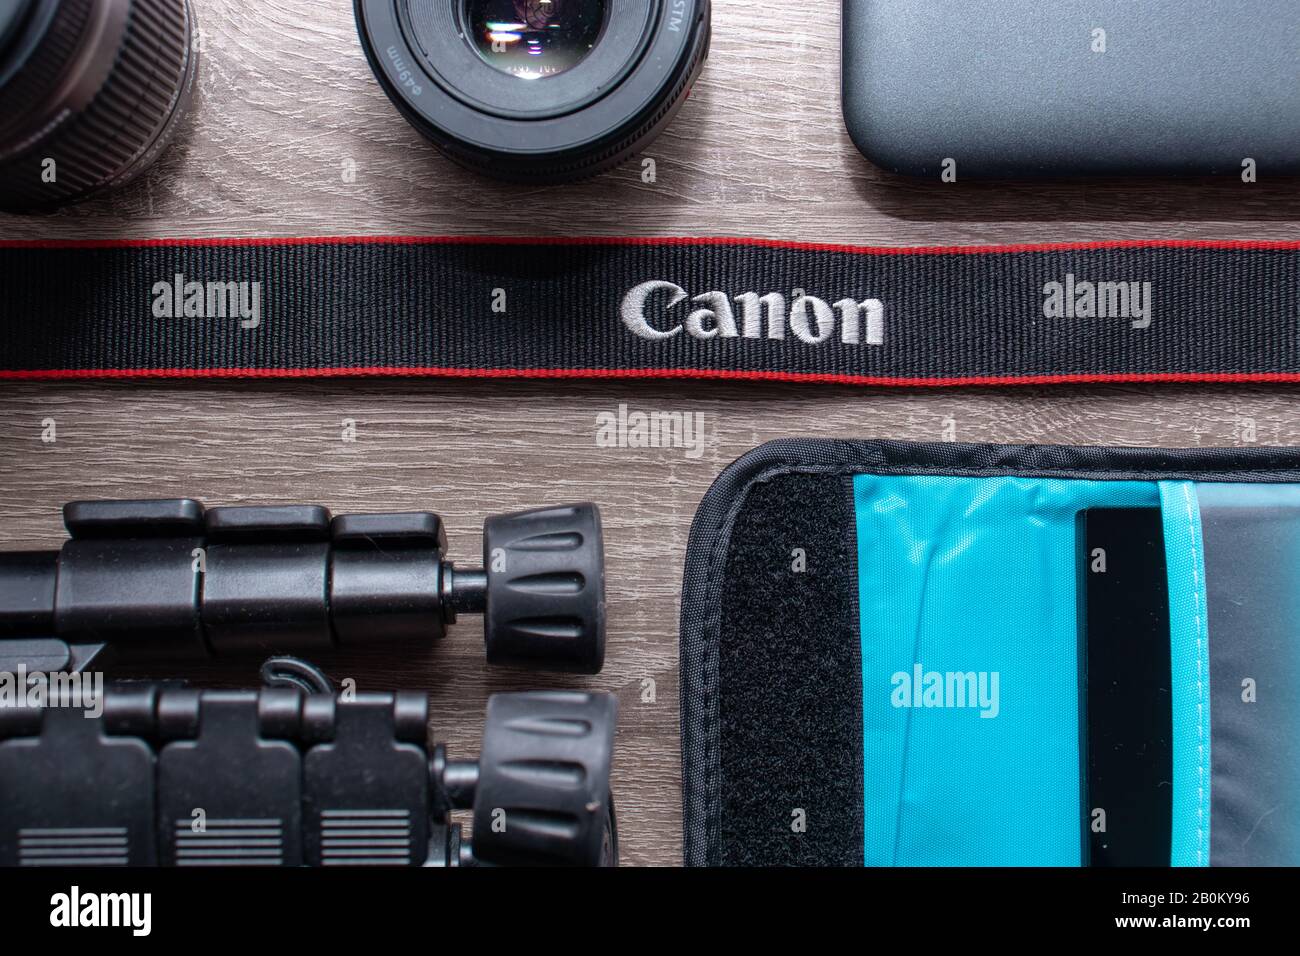 Photography flat lay on a grey wood table. Canon black strap with red  stripes in focus. Canon lenses, canon camera gear Stock Photo - Alamy